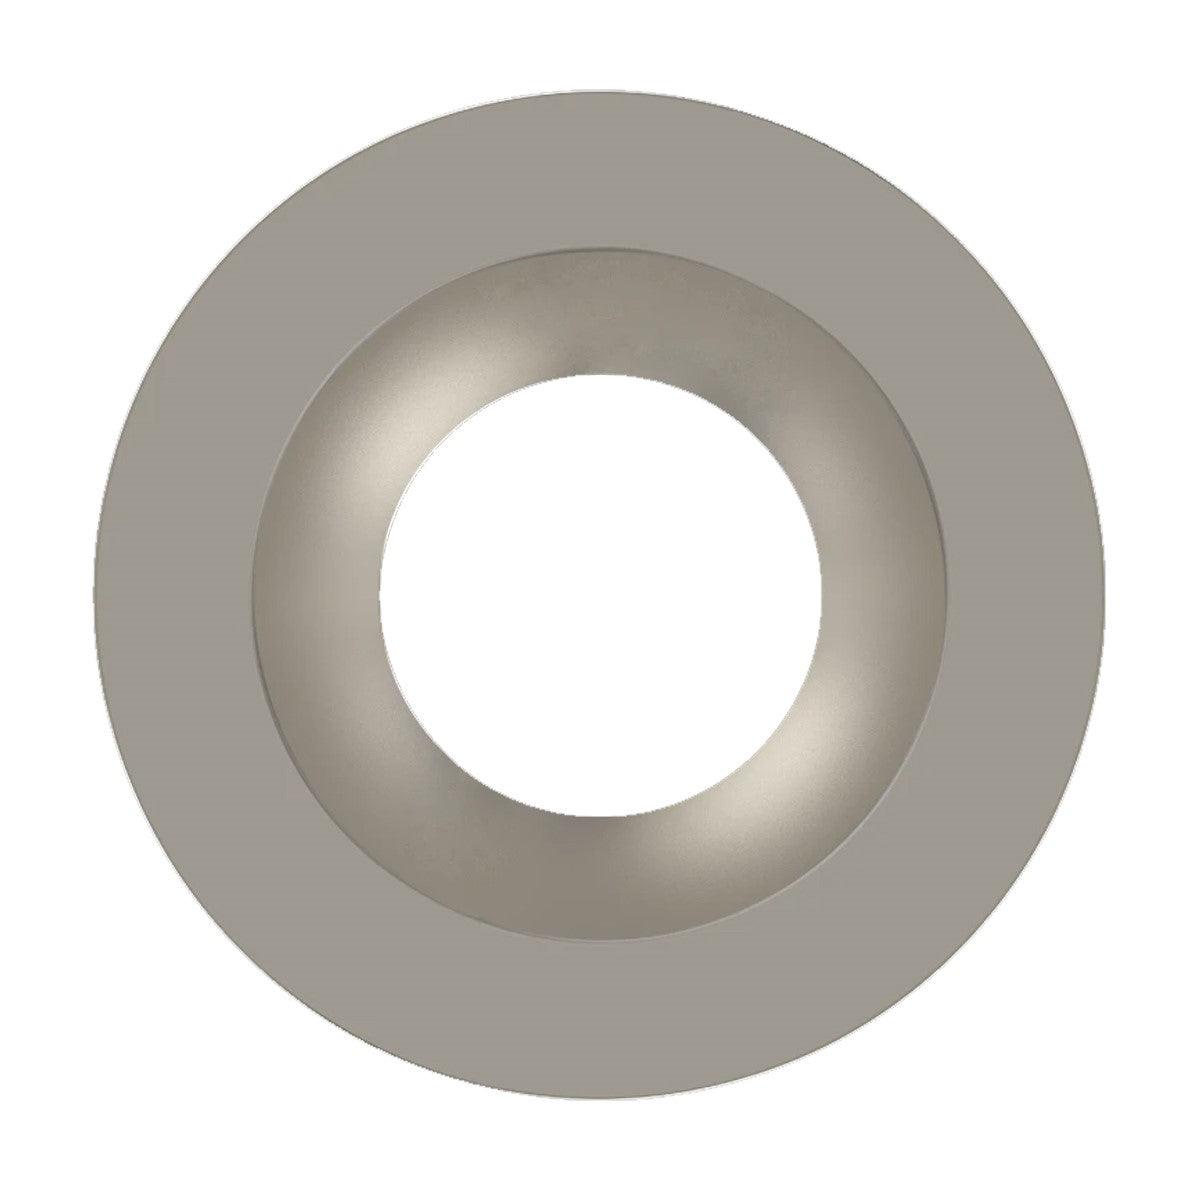 RAB 6 Inch Round Brushed Nickel / Smooth Trim for HA6 Series - Bees Lighting